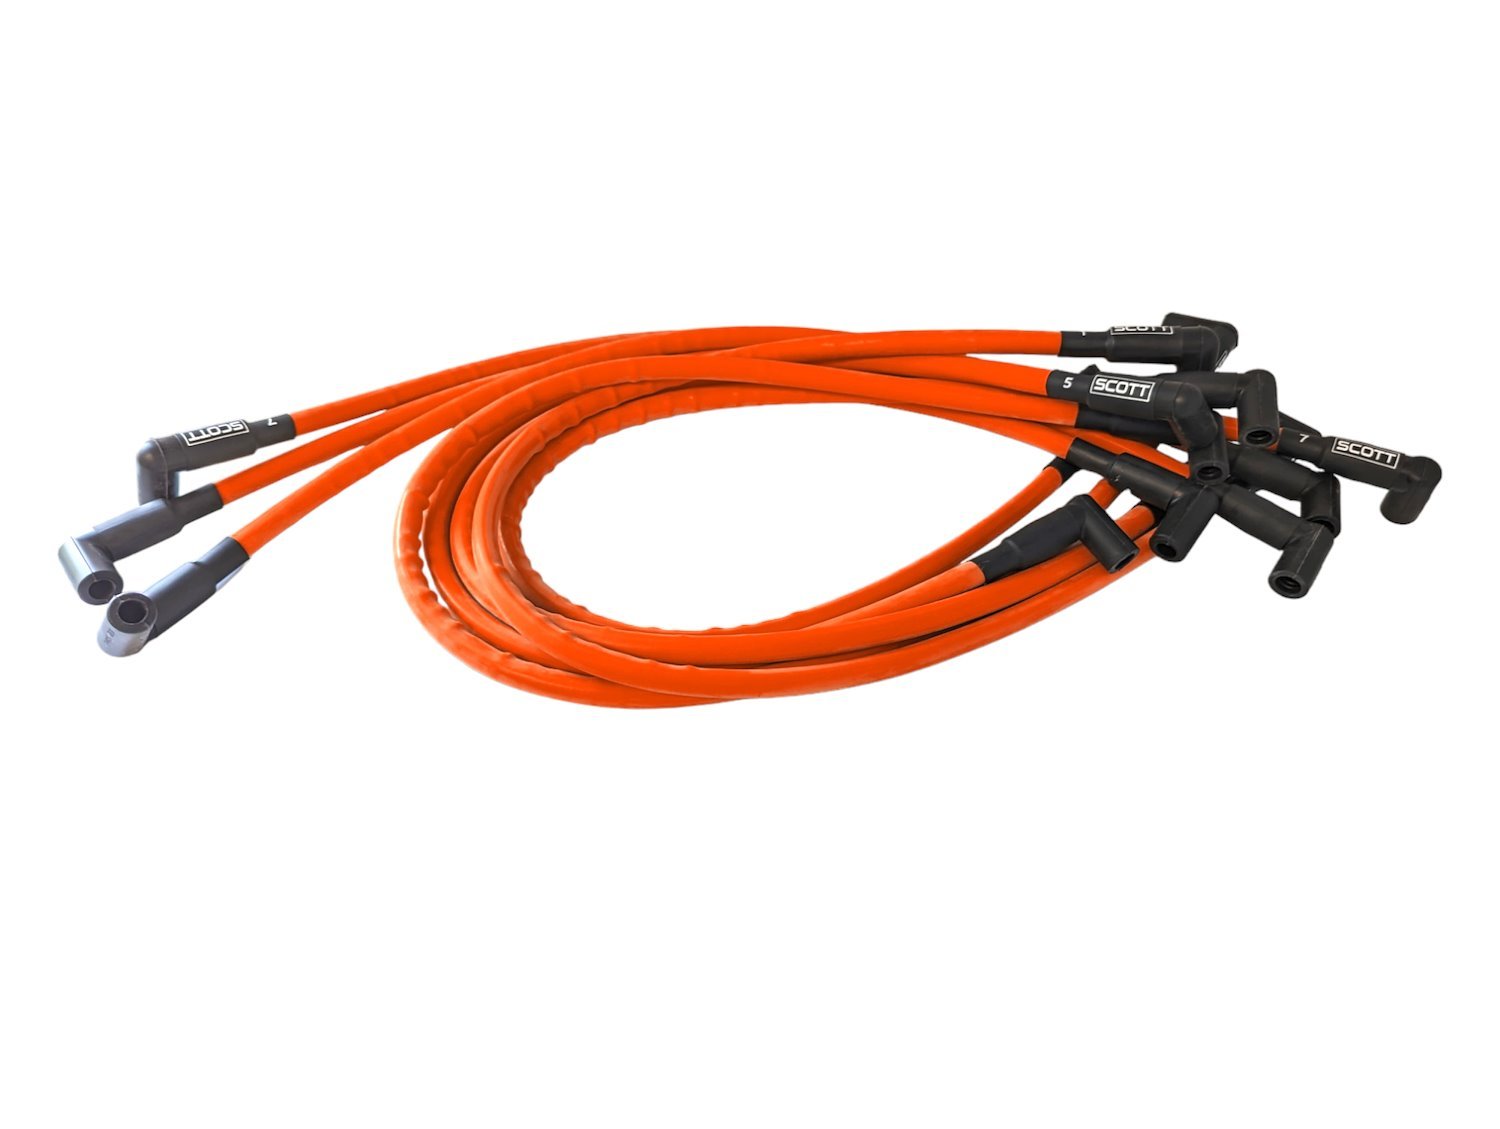 SPW-CH-402-9 High-Performance Silicone-Sleeved Spark Plug Wire Set for Small Block Chevy, Over Valve Cover [Fluorescent Orange]